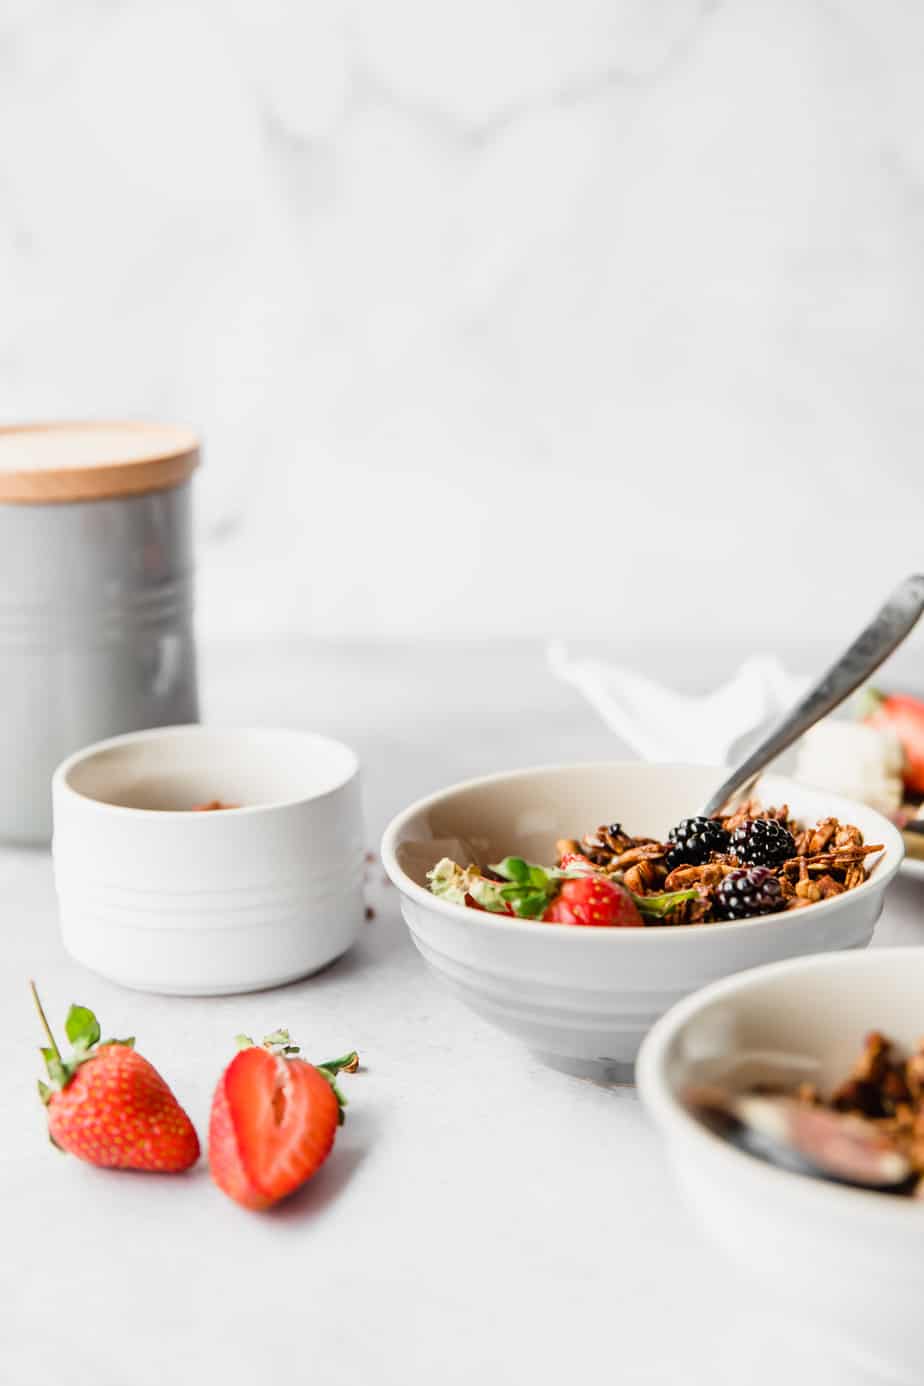 A white bowl filled with granola and fresh fruit.